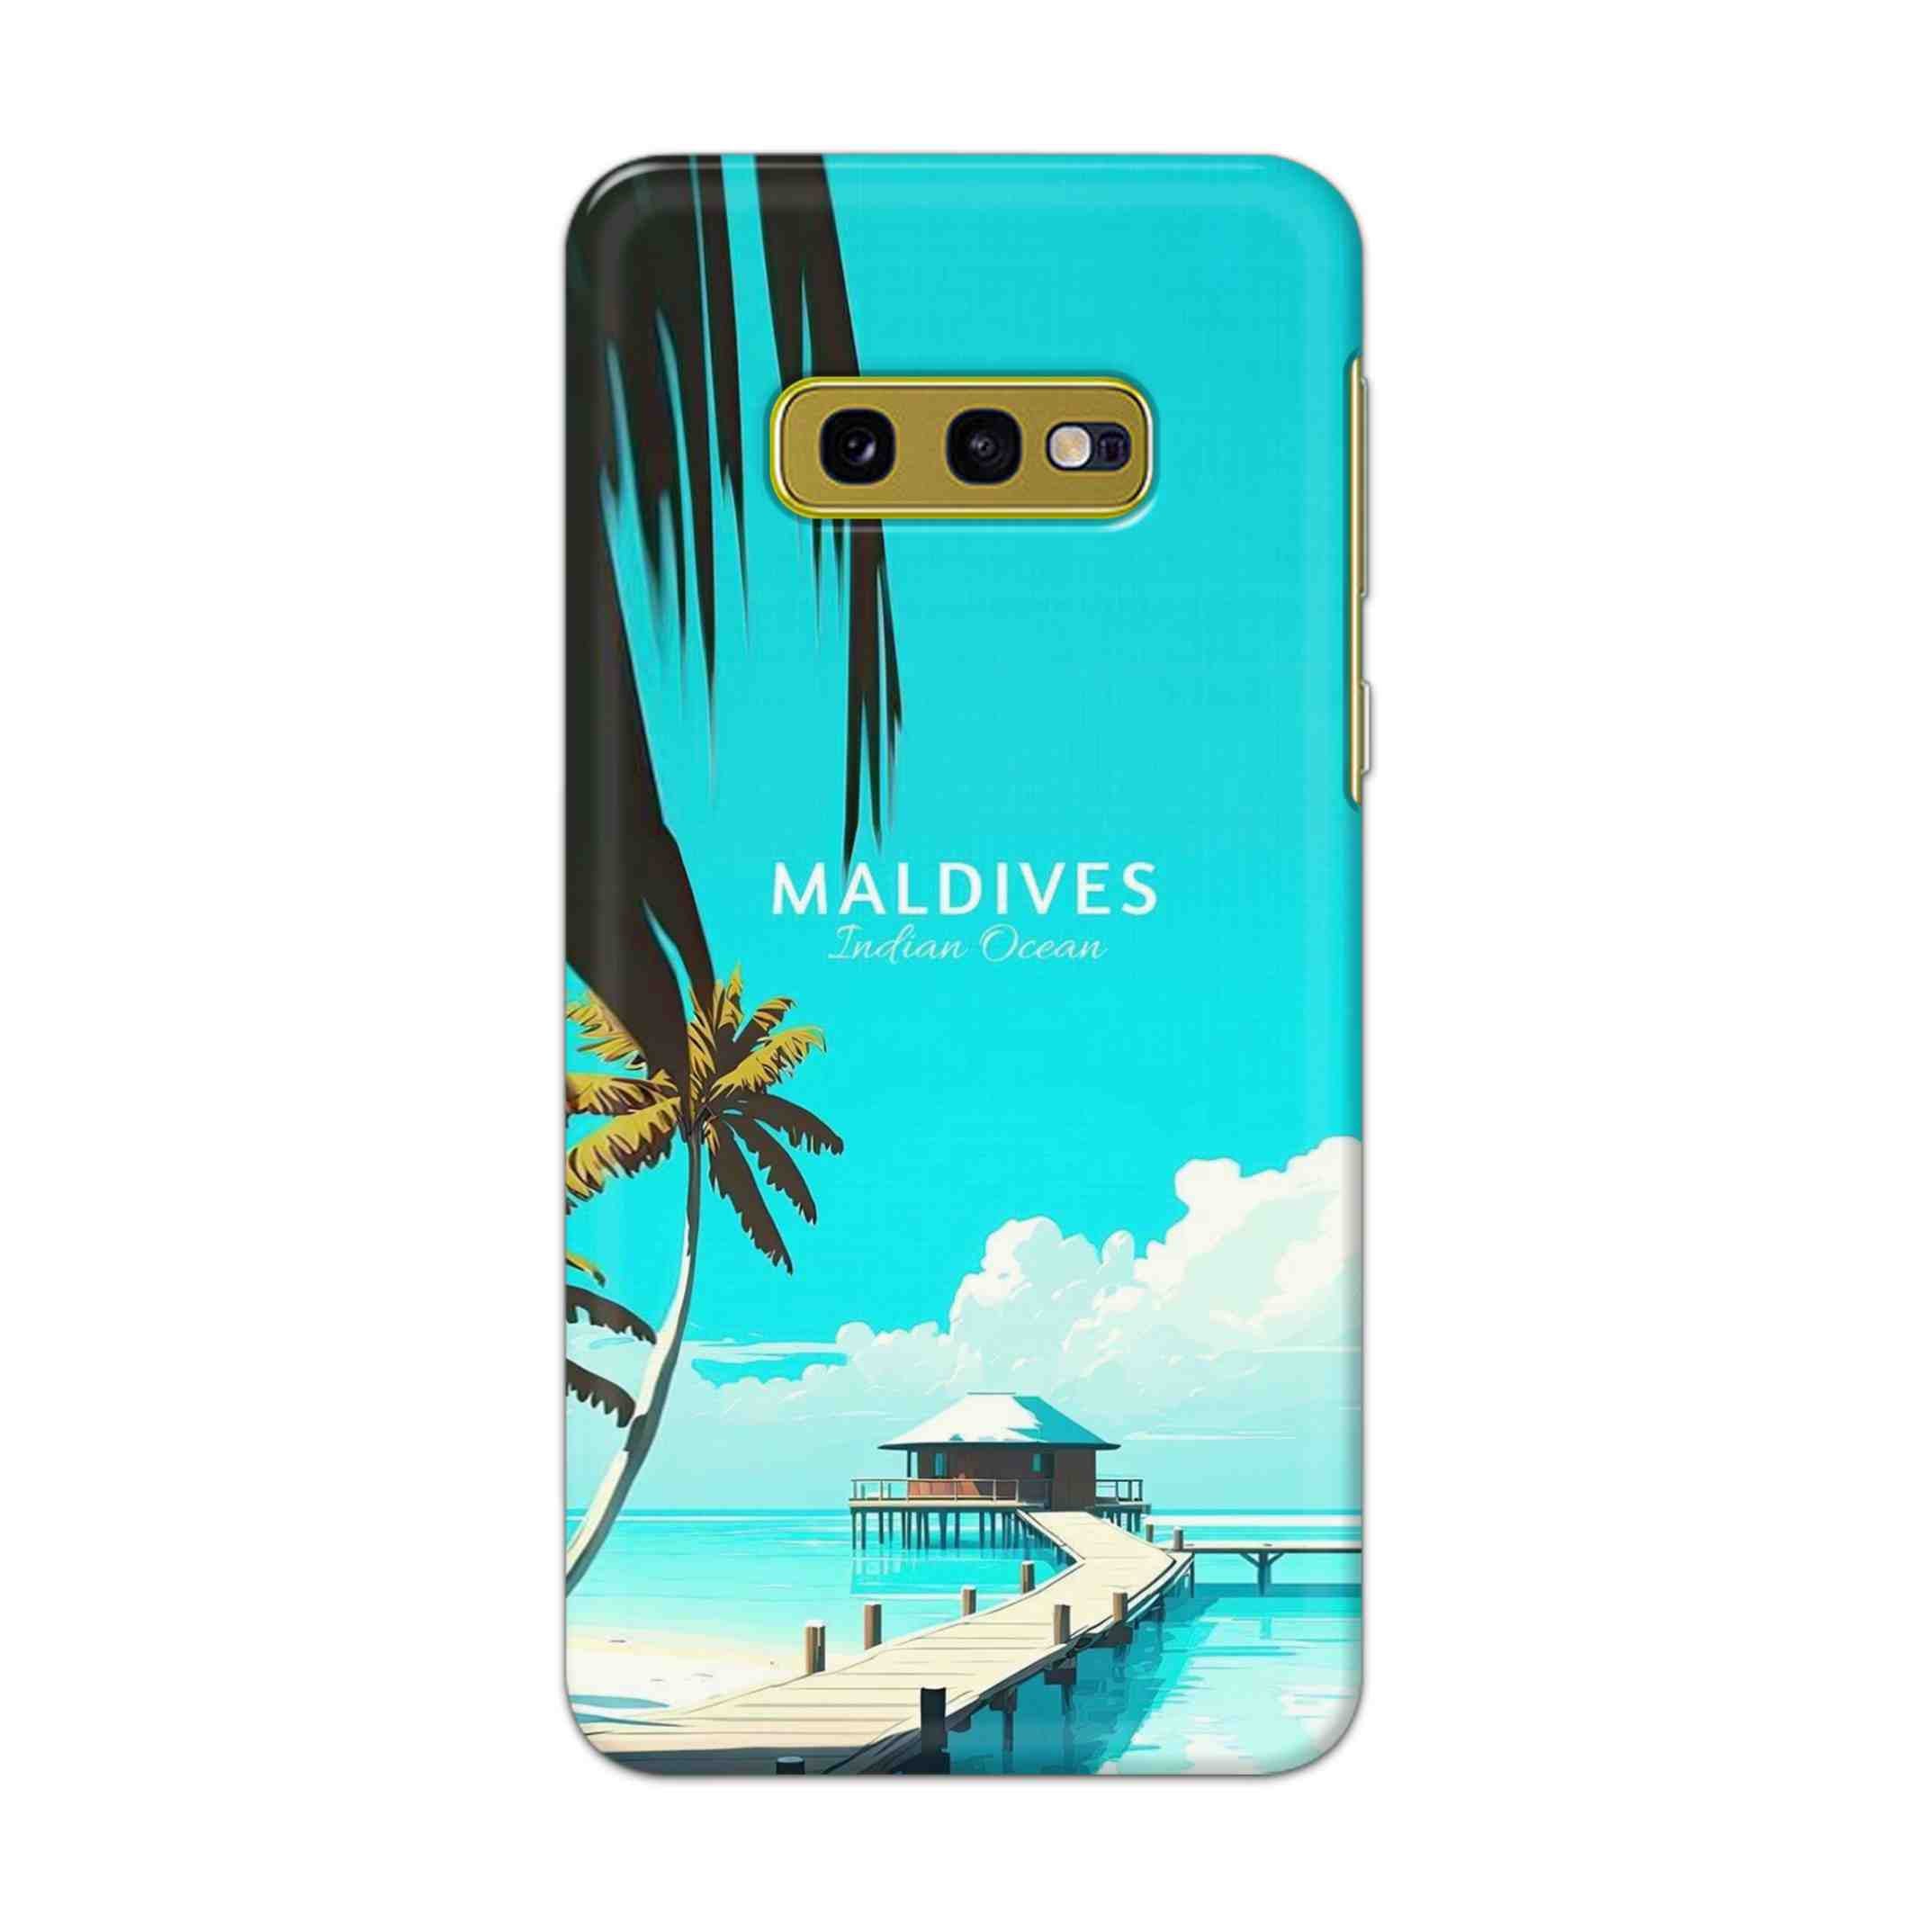 Buy Maldives Hard Back Mobile Phone Case Cover For Samsung Galaxy S10e Online